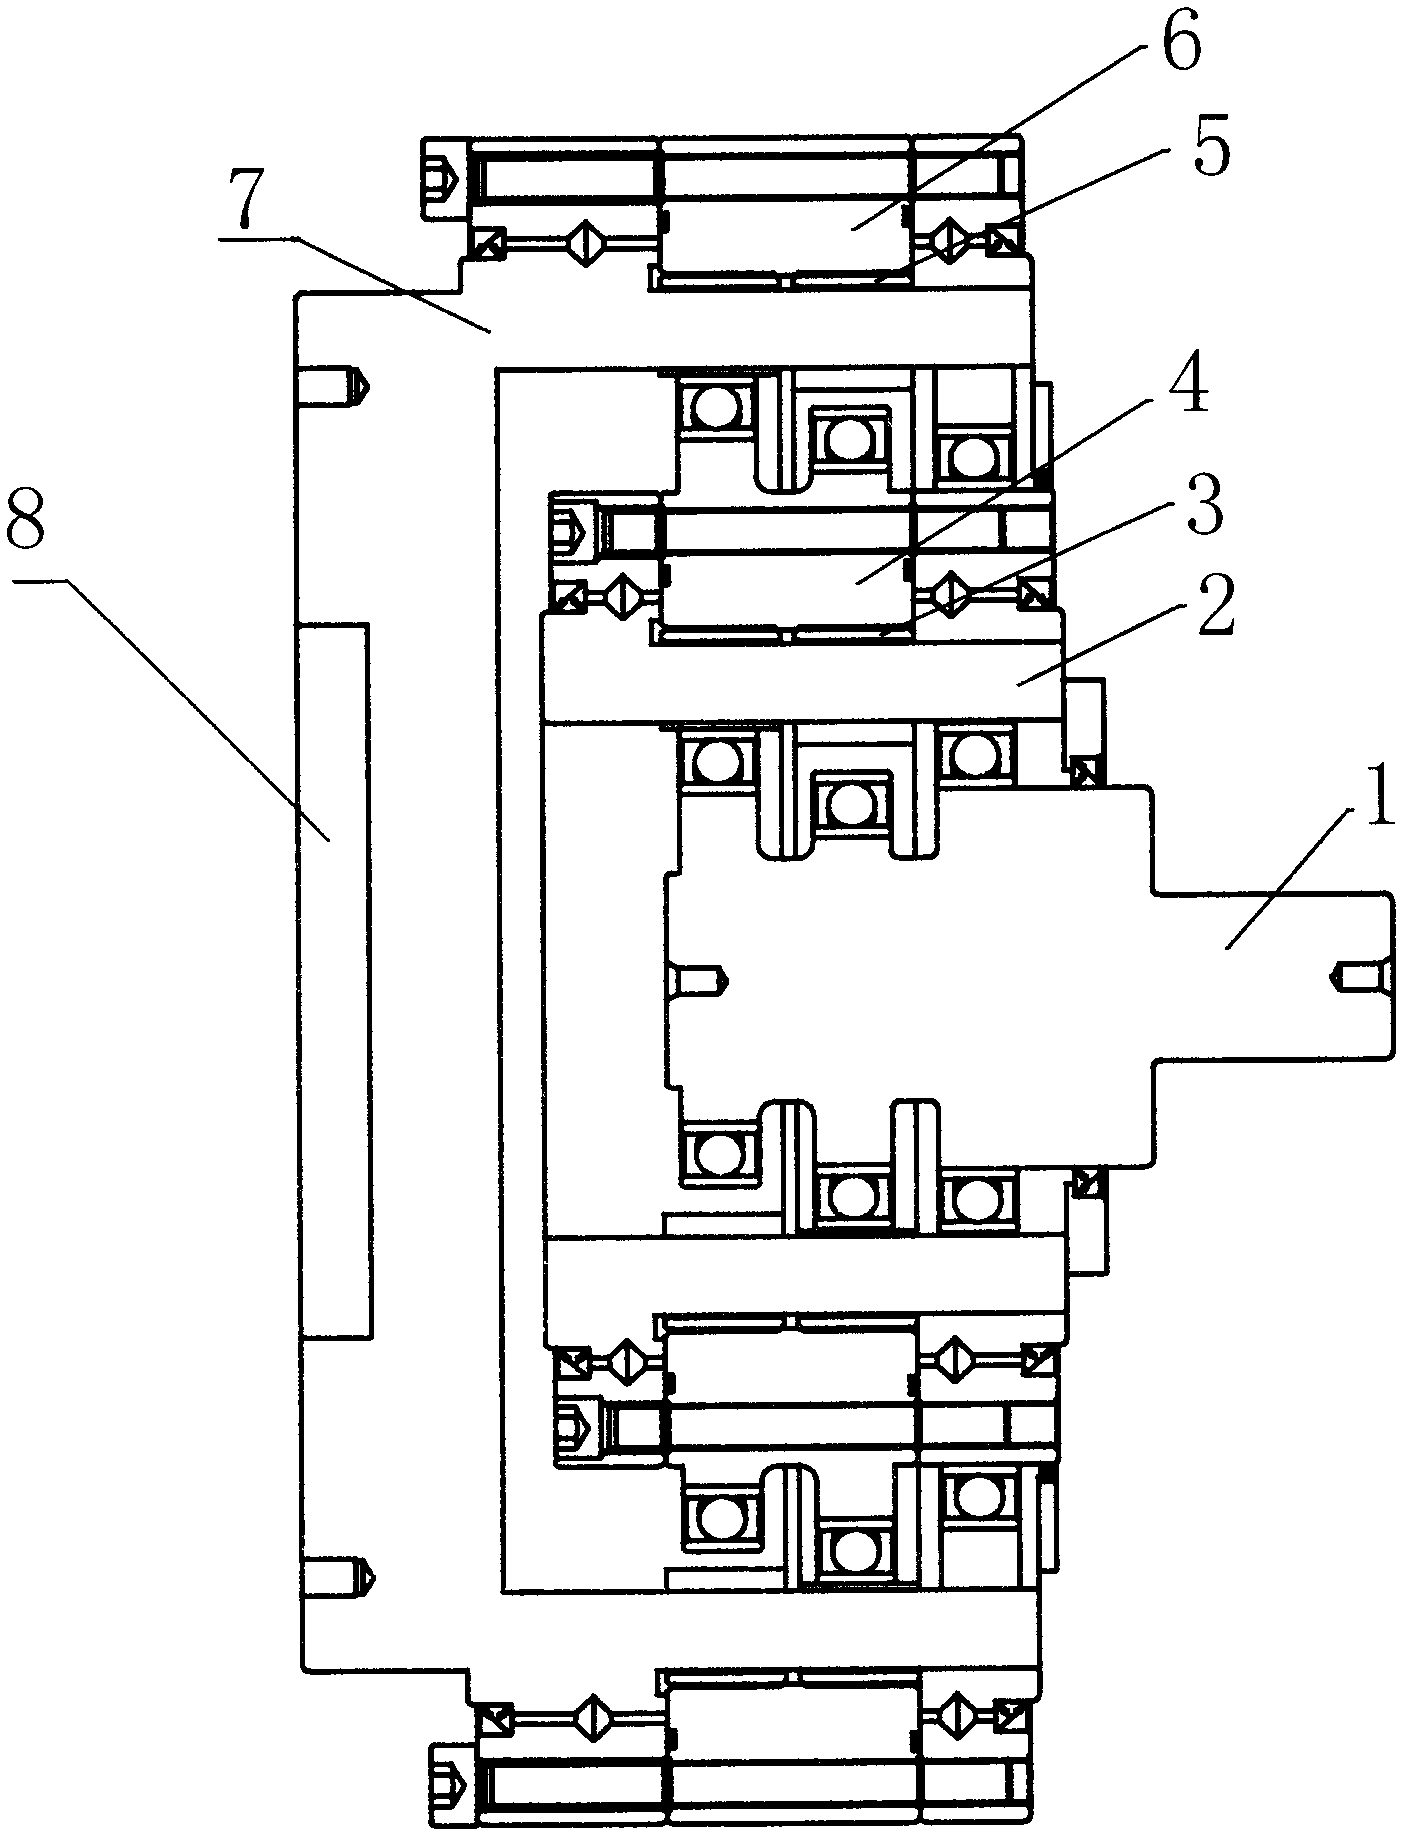 Embedded dual-layer rolling harmonious reducer